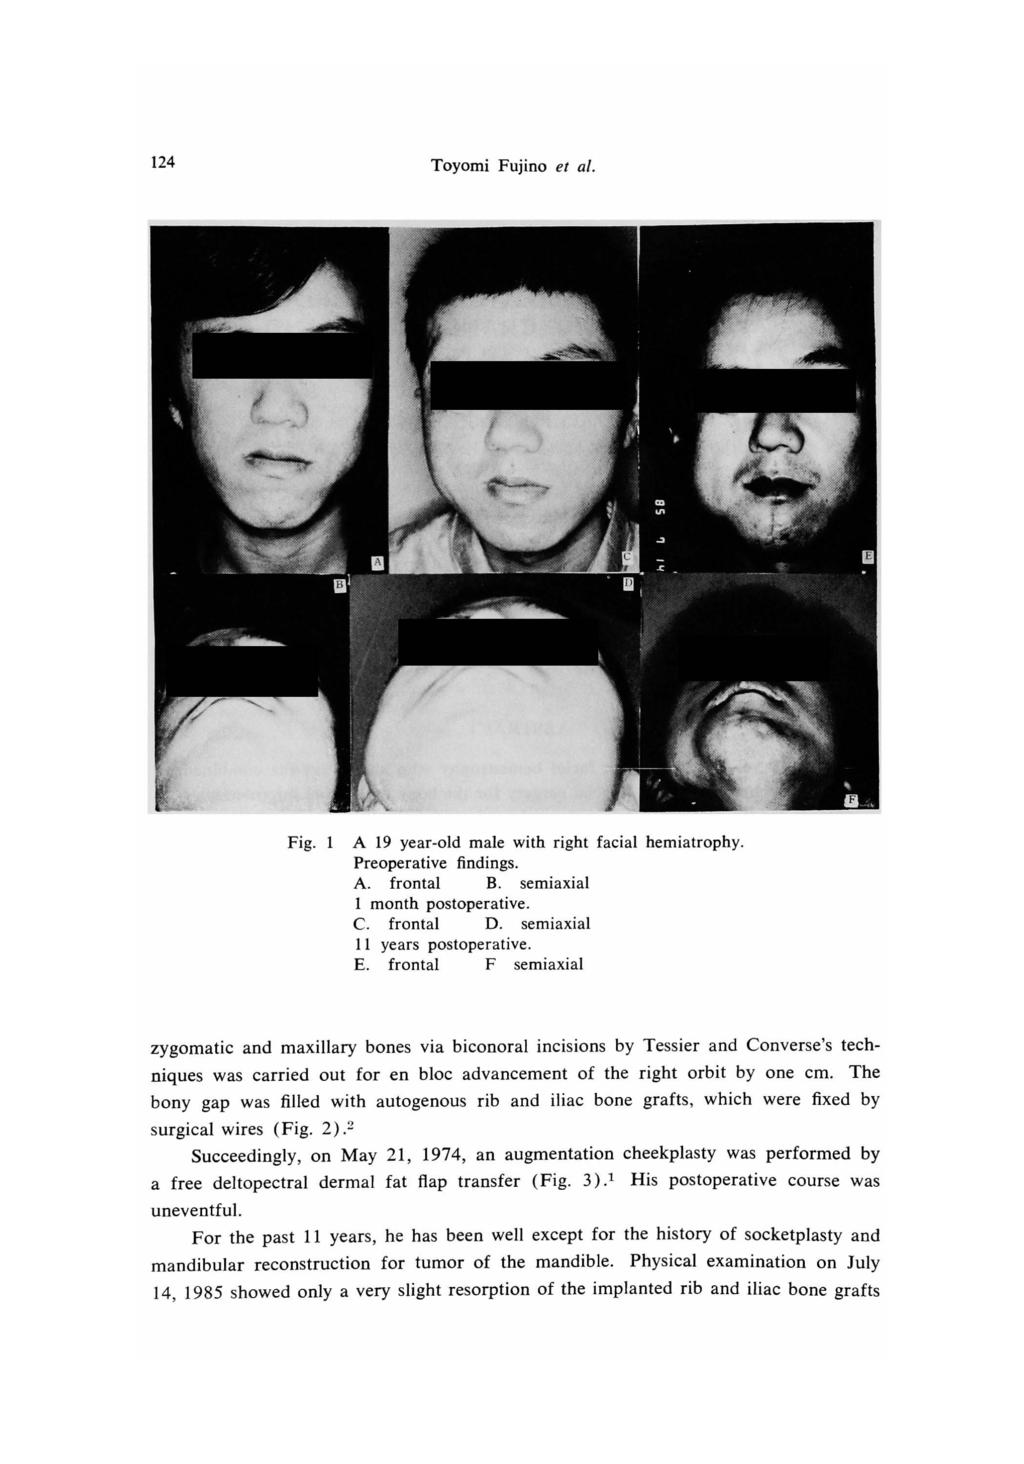 124 Toyomi Fujino et al. Fig. 1 A 19 year-old male with right facial hemiatrophy. Preoperative findings. A. frontal B. semiaxial 1 month postoperative. C. frontal D. semiaxial 11 years postoperative.